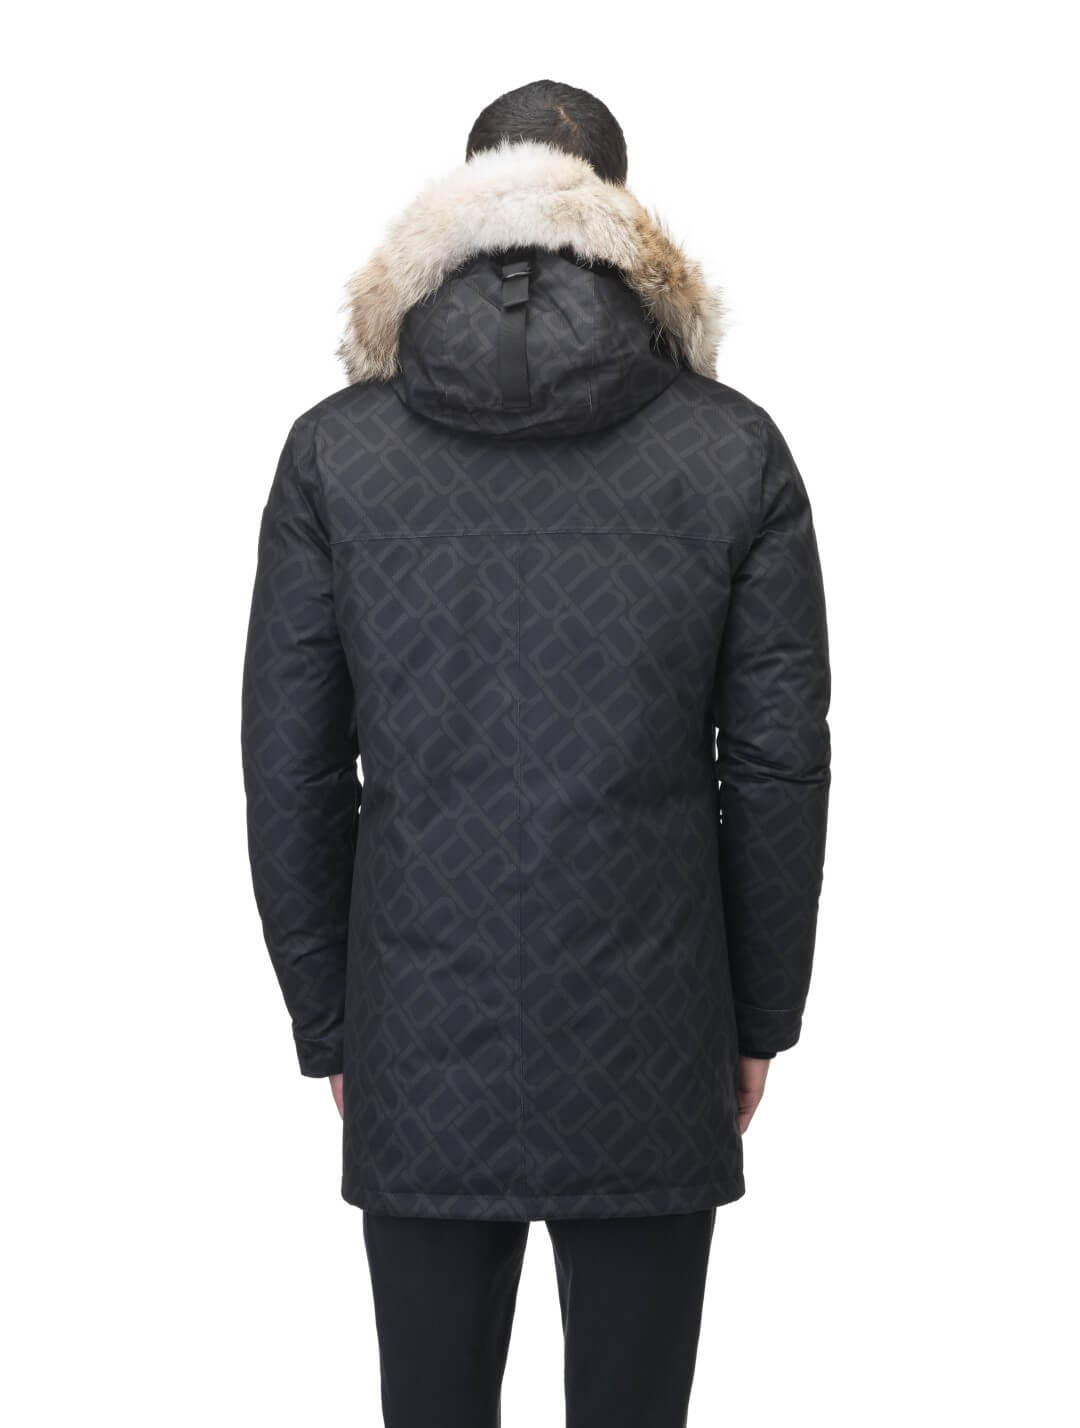 Men's slim fitting waist length parka with removable fur trim on the hood and two waist patch pockets in Dark Monogram